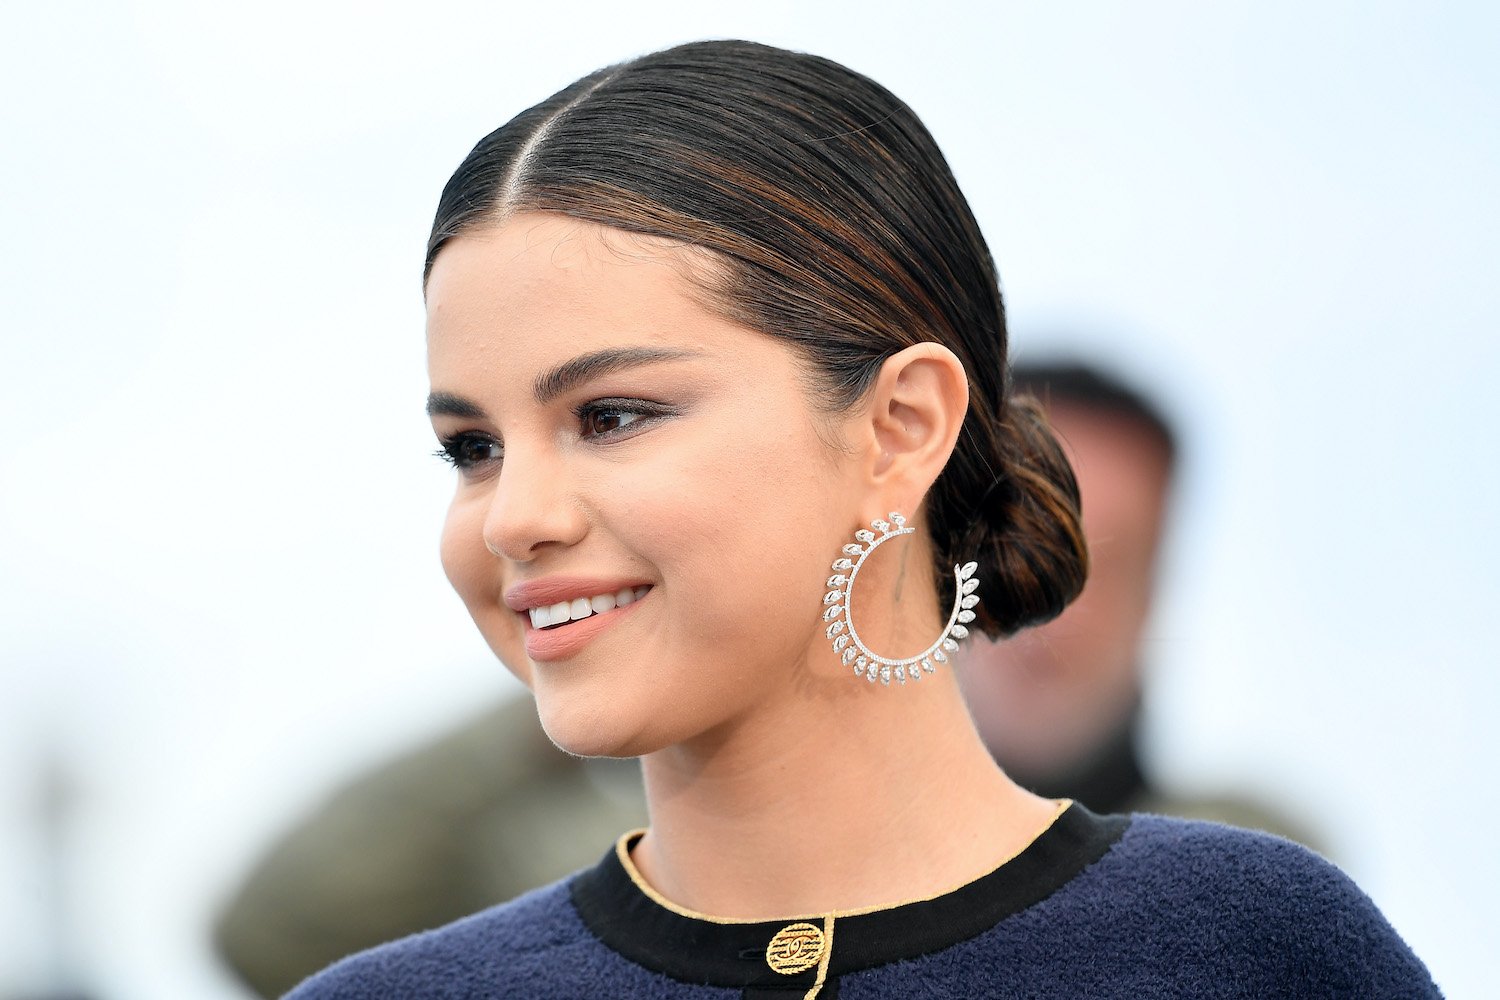 Selena Gomez attends the photocall for 'The Dead Don't Die' during the 72nd annual Cannes Film Festival, 2019